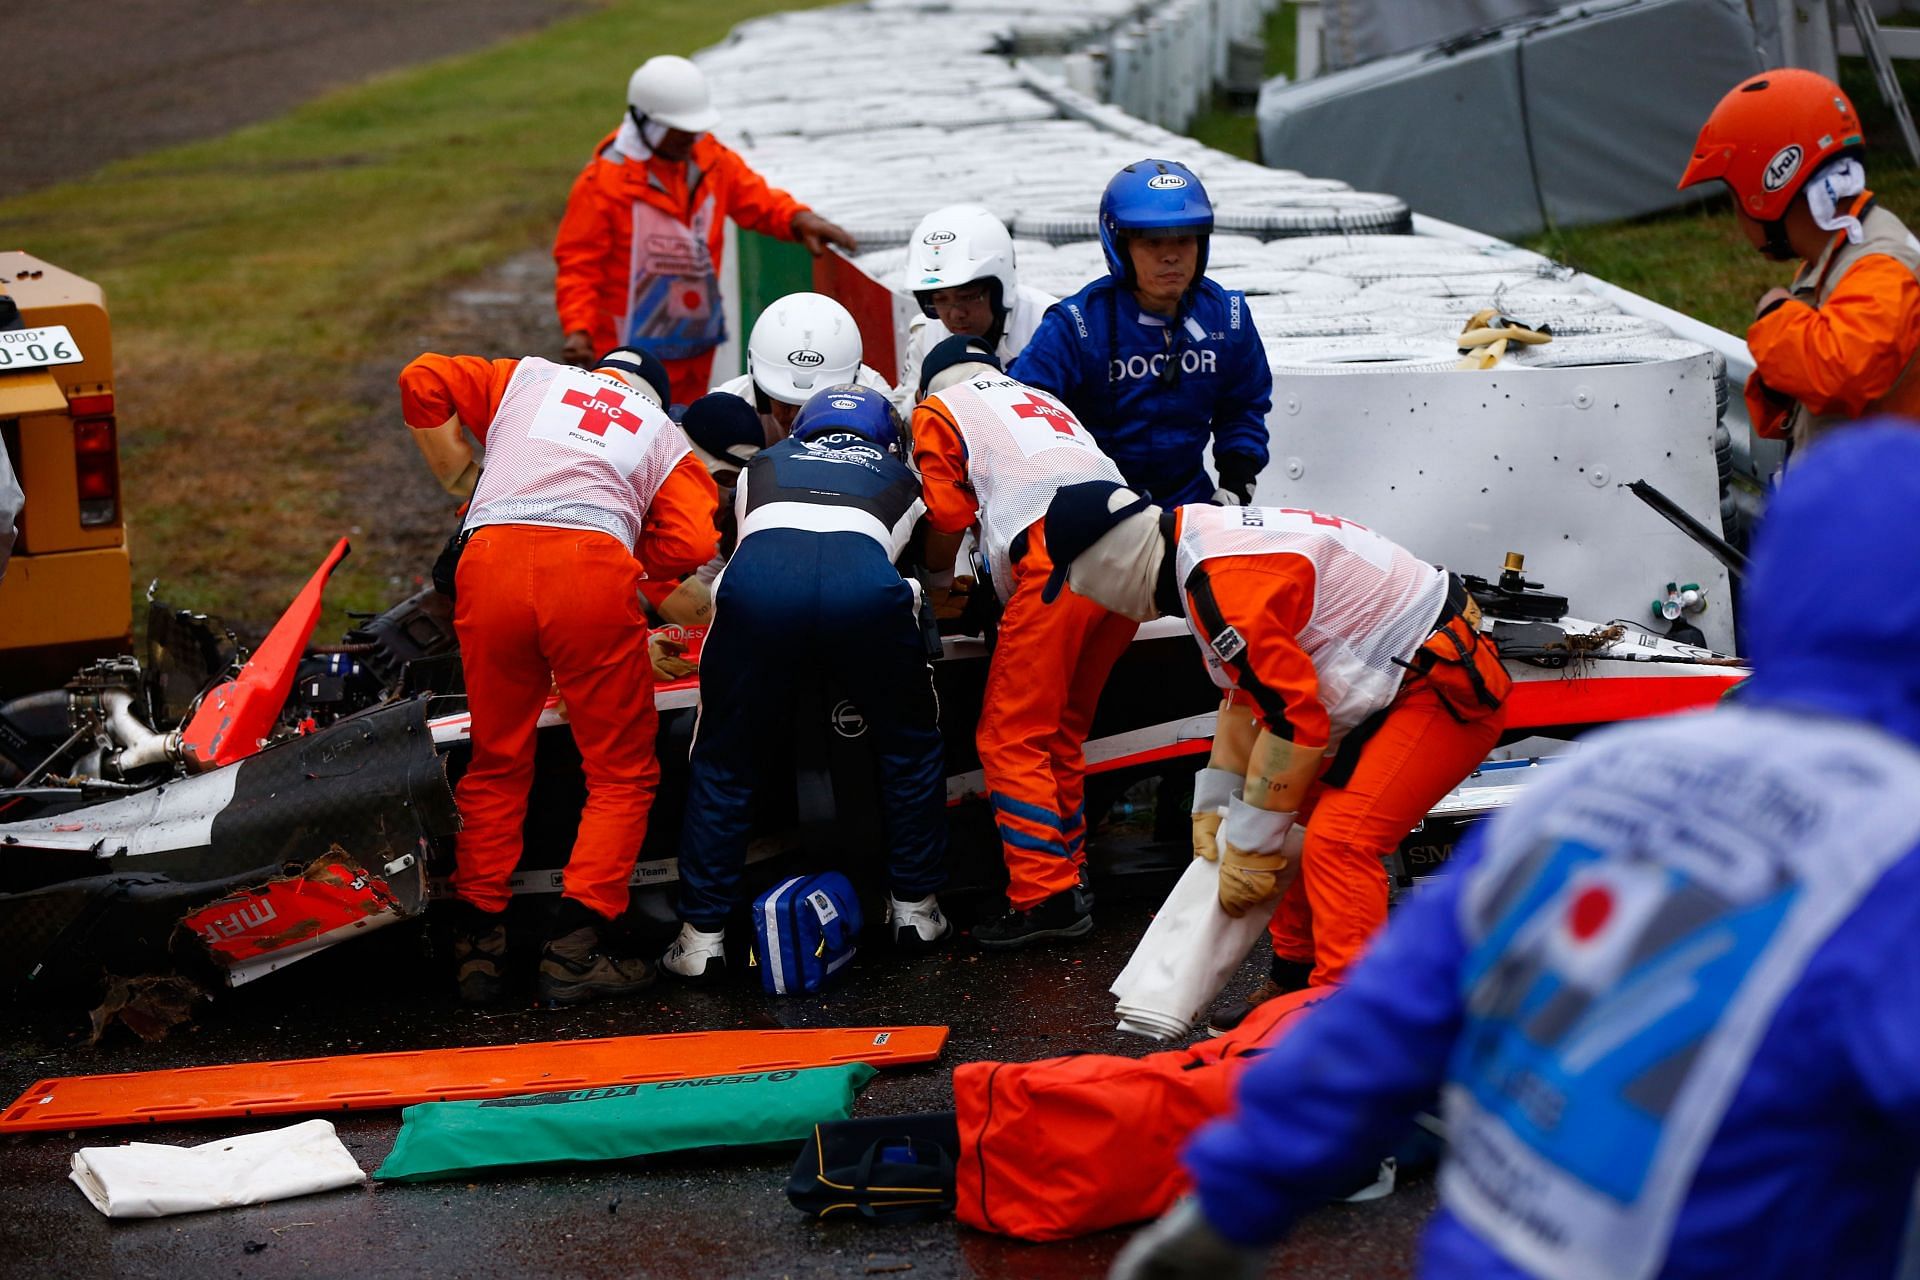 Jules Bianchi, godfather of Charles Leclerc, after the 2014 Japanese GP crash (Photo by Getty Images/Getty Images)